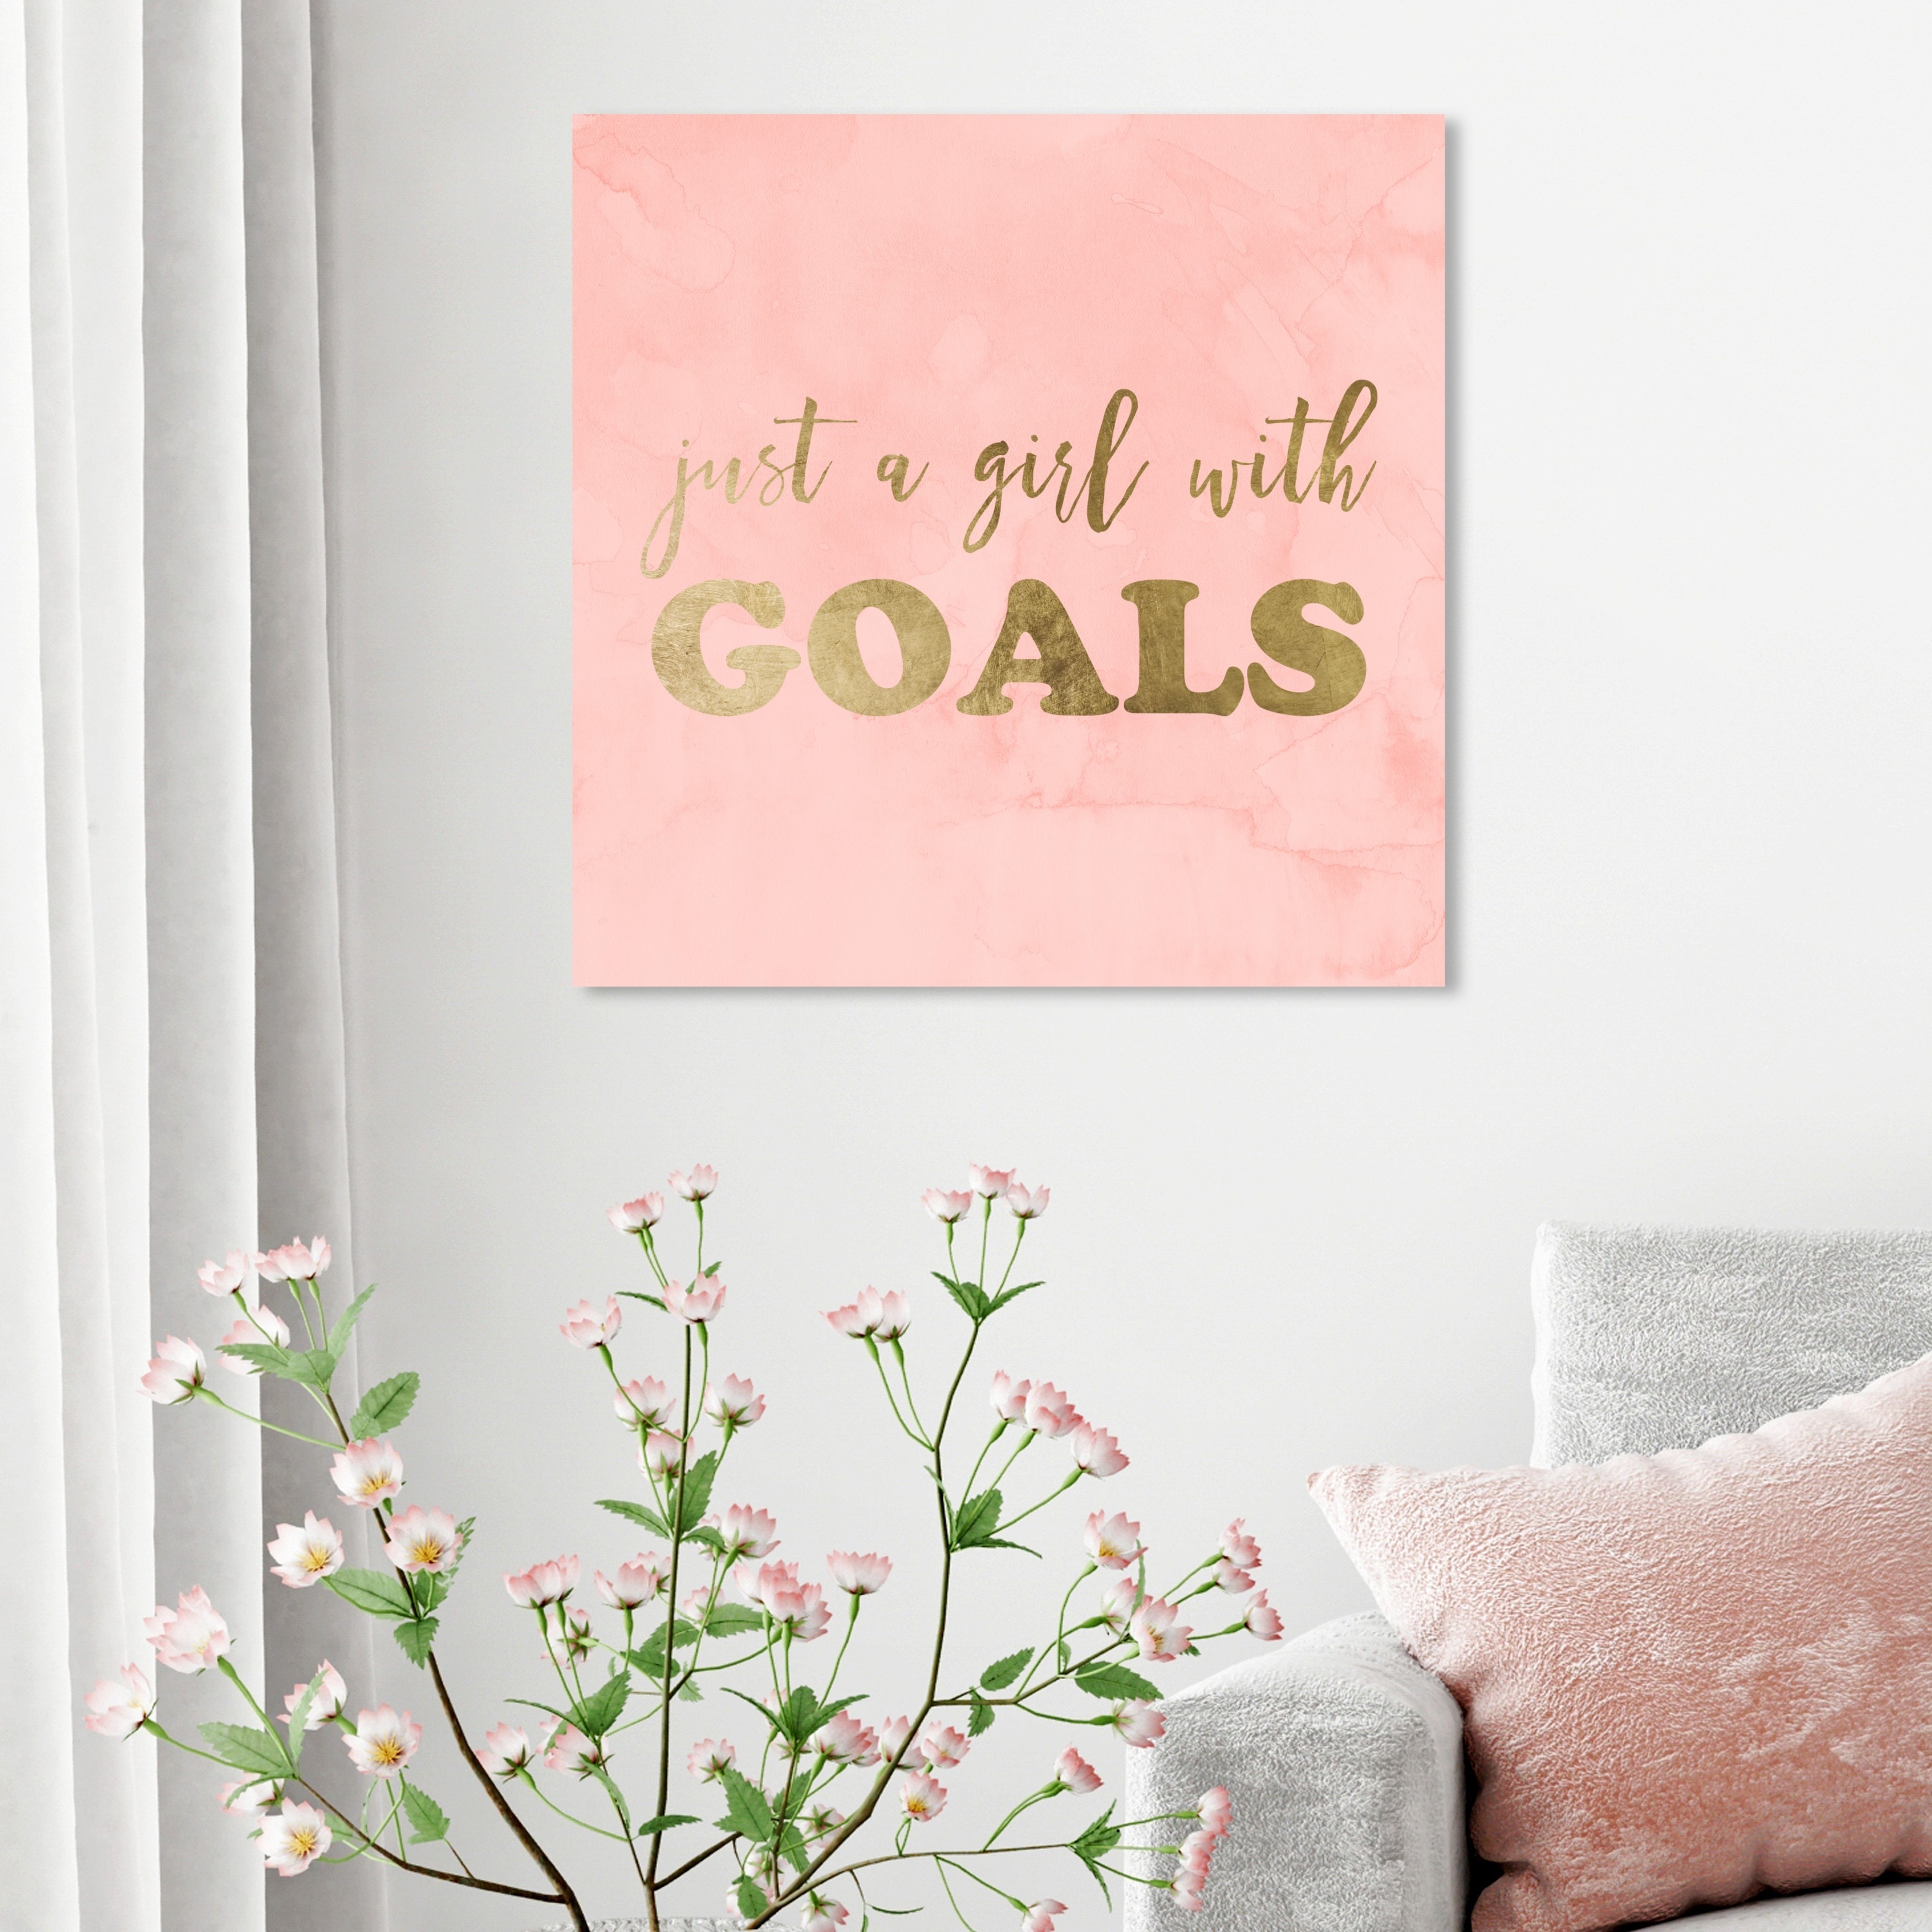 Floral Nursery Art, Pink Gray Nursery Decor, Baby Girl Nursery Decor,  Prints or Canvas Wall Art, Girl Bedroom Pictures, Quote Art, Set of 3 